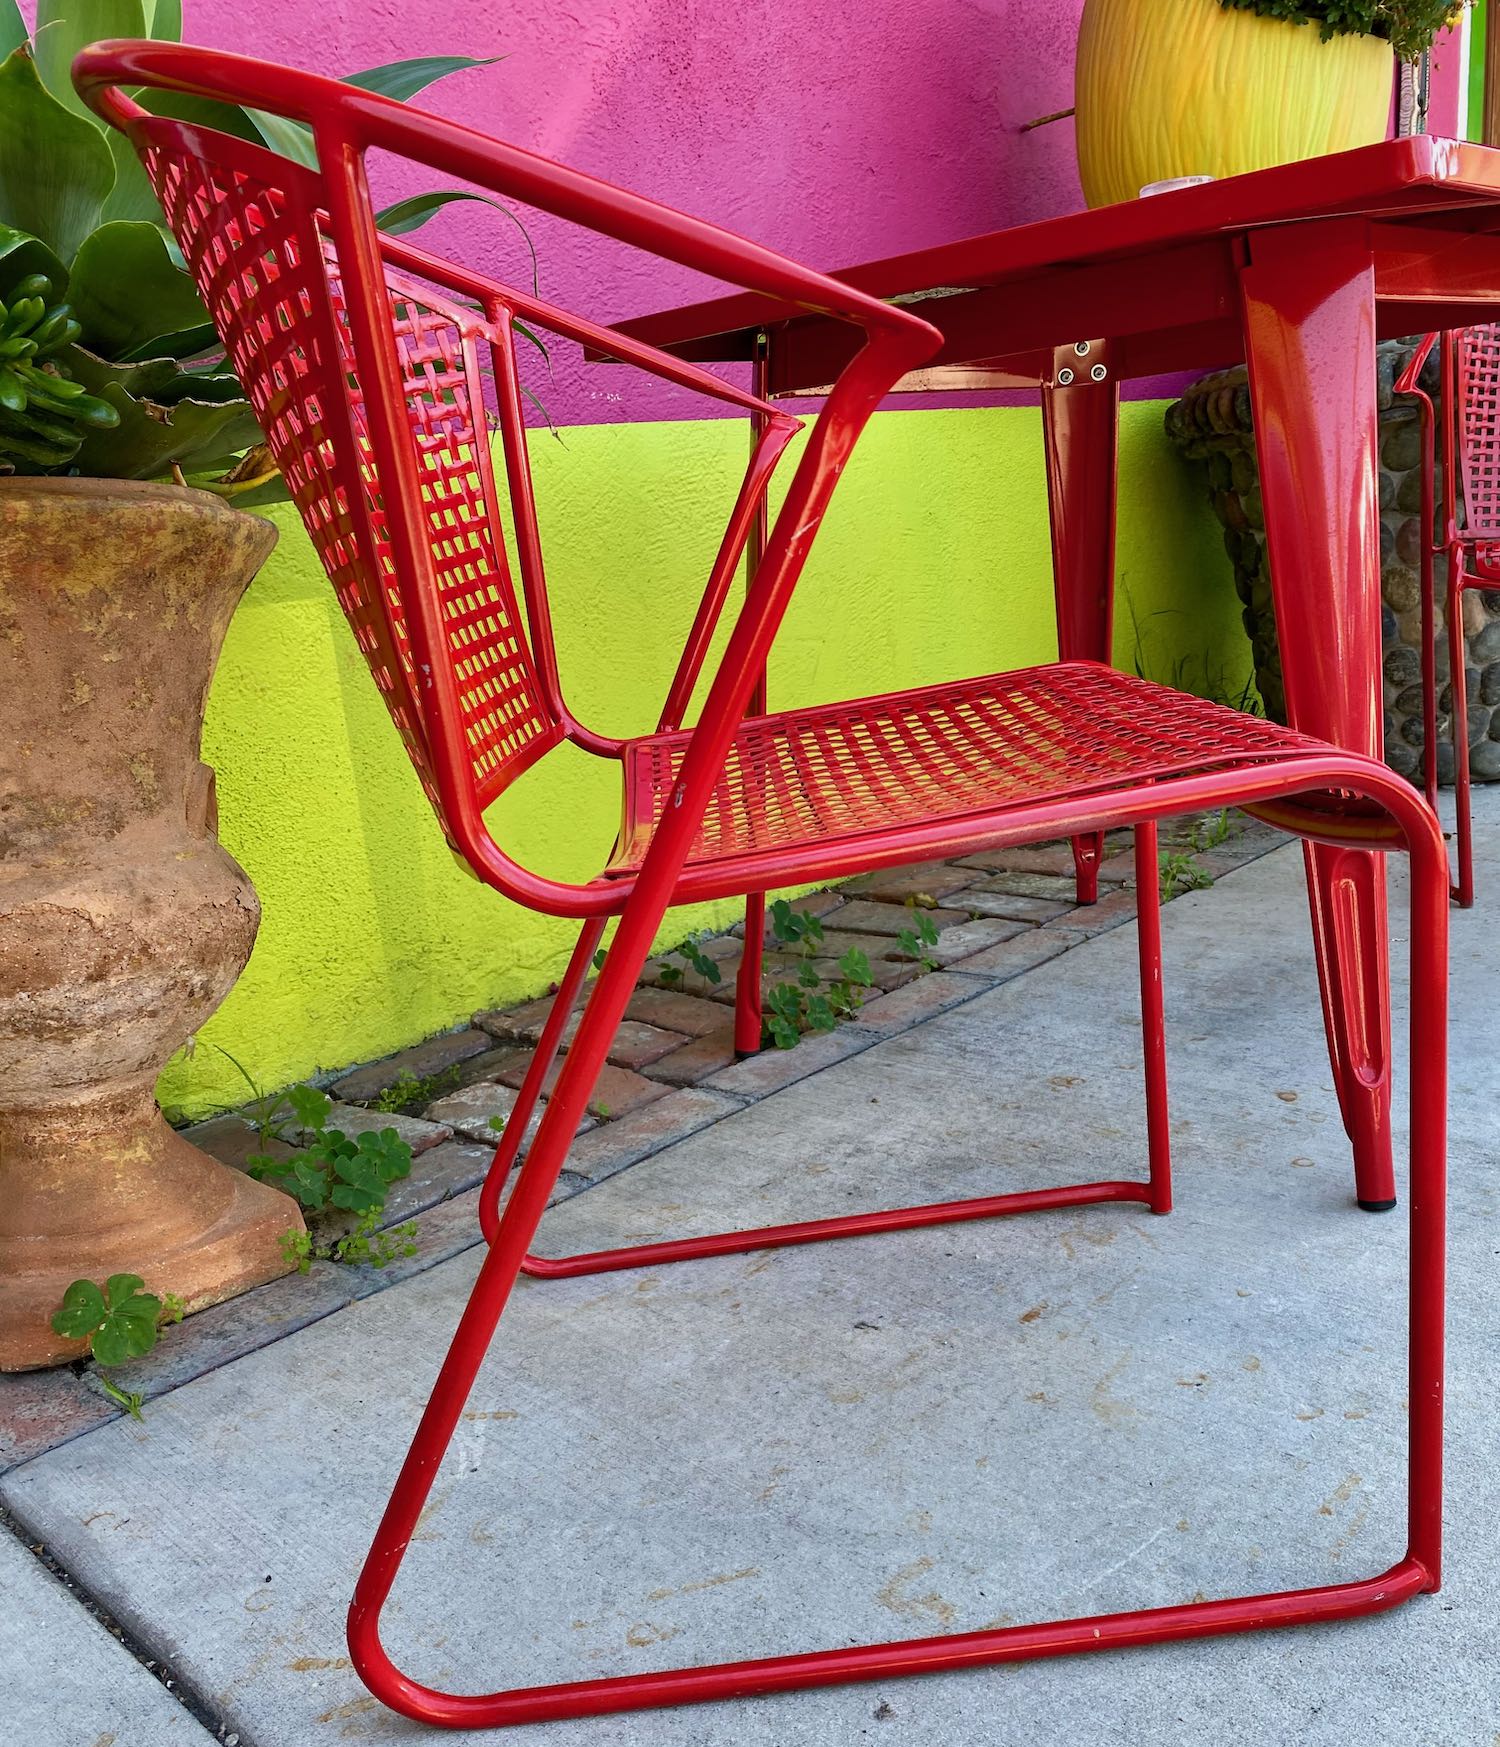 Red Table and Chair with Pink and Chartreuse Walls